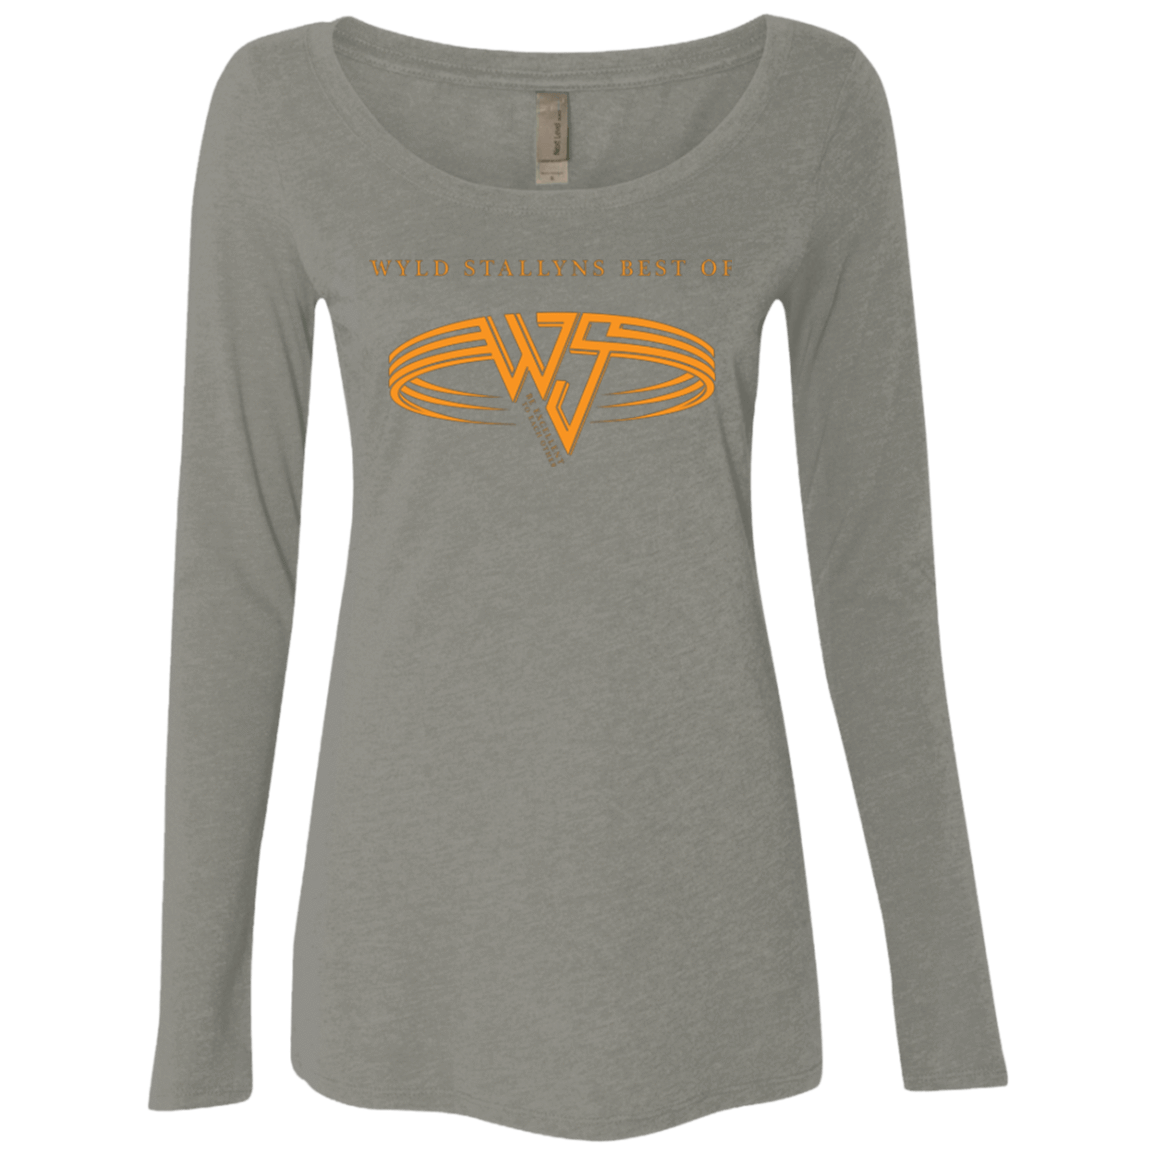 T-Shirts Venetian Grey / Small Be Excellent To Each Other Women's Triblend Long Sleeve Shirt